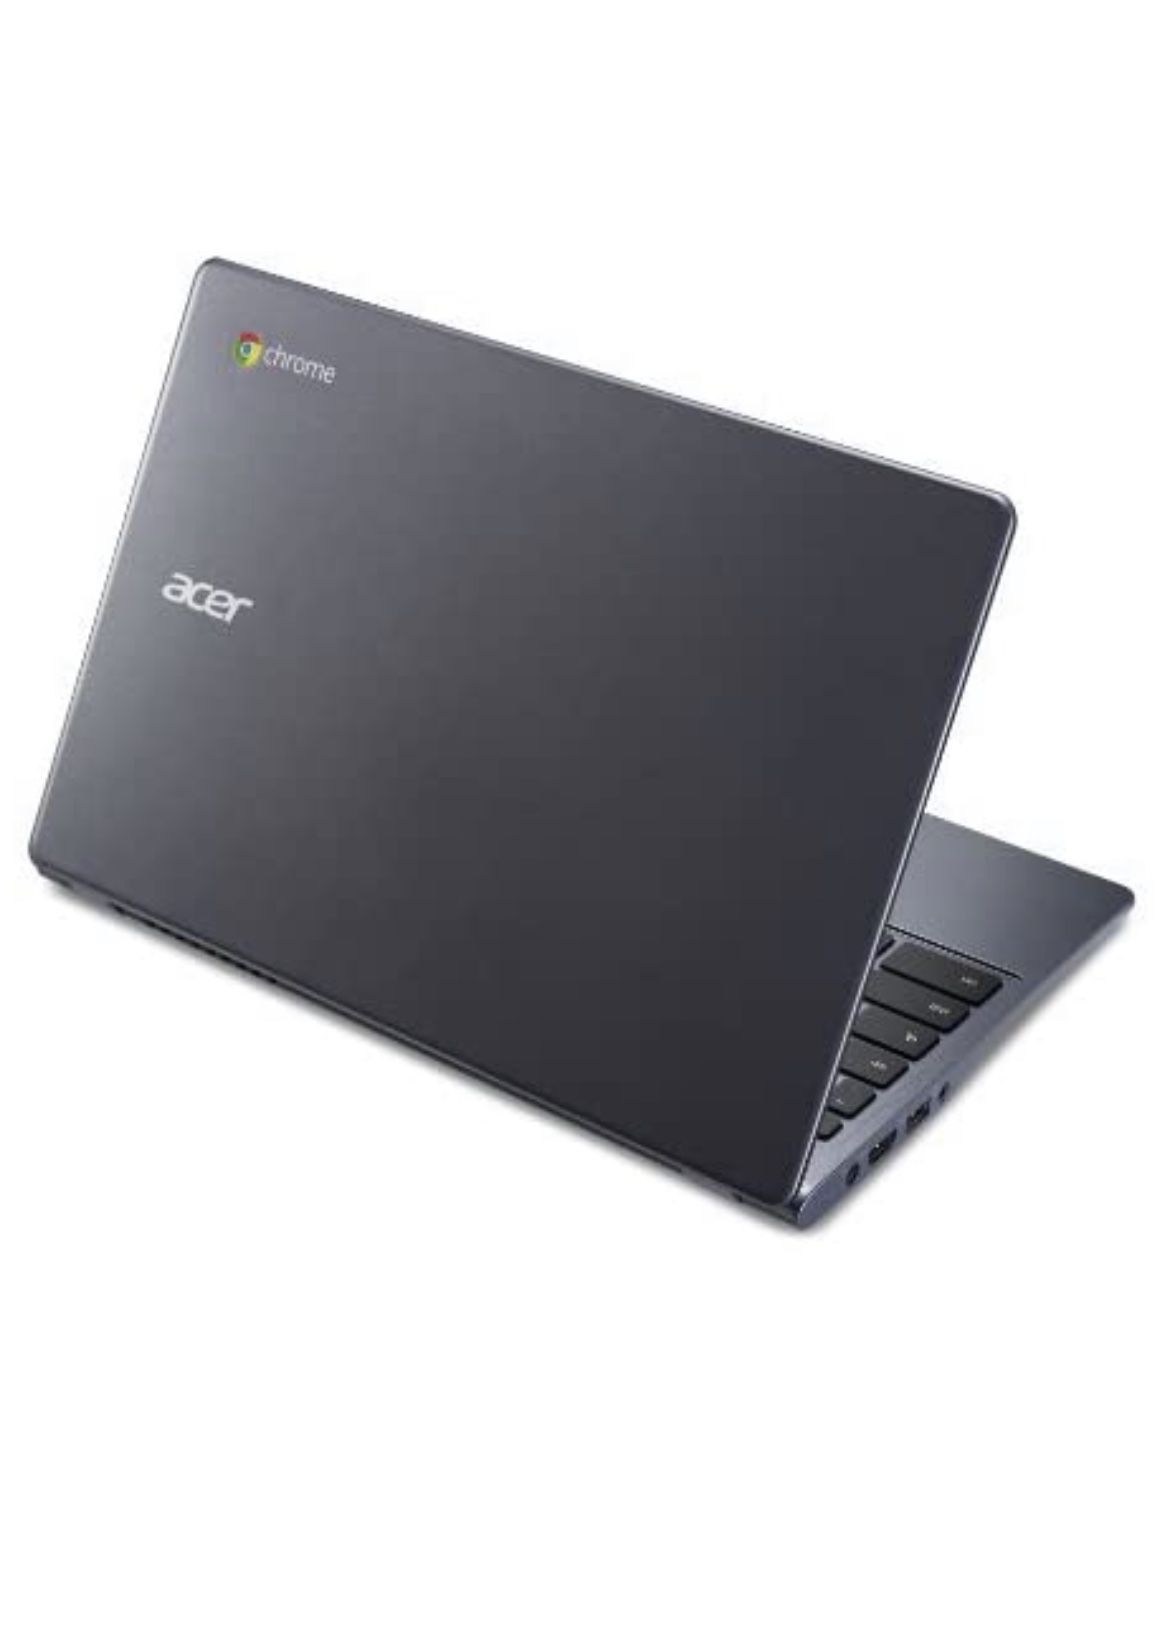 Acer C720 Chromebook. Amazing condition. Cheap price for what it’s worth